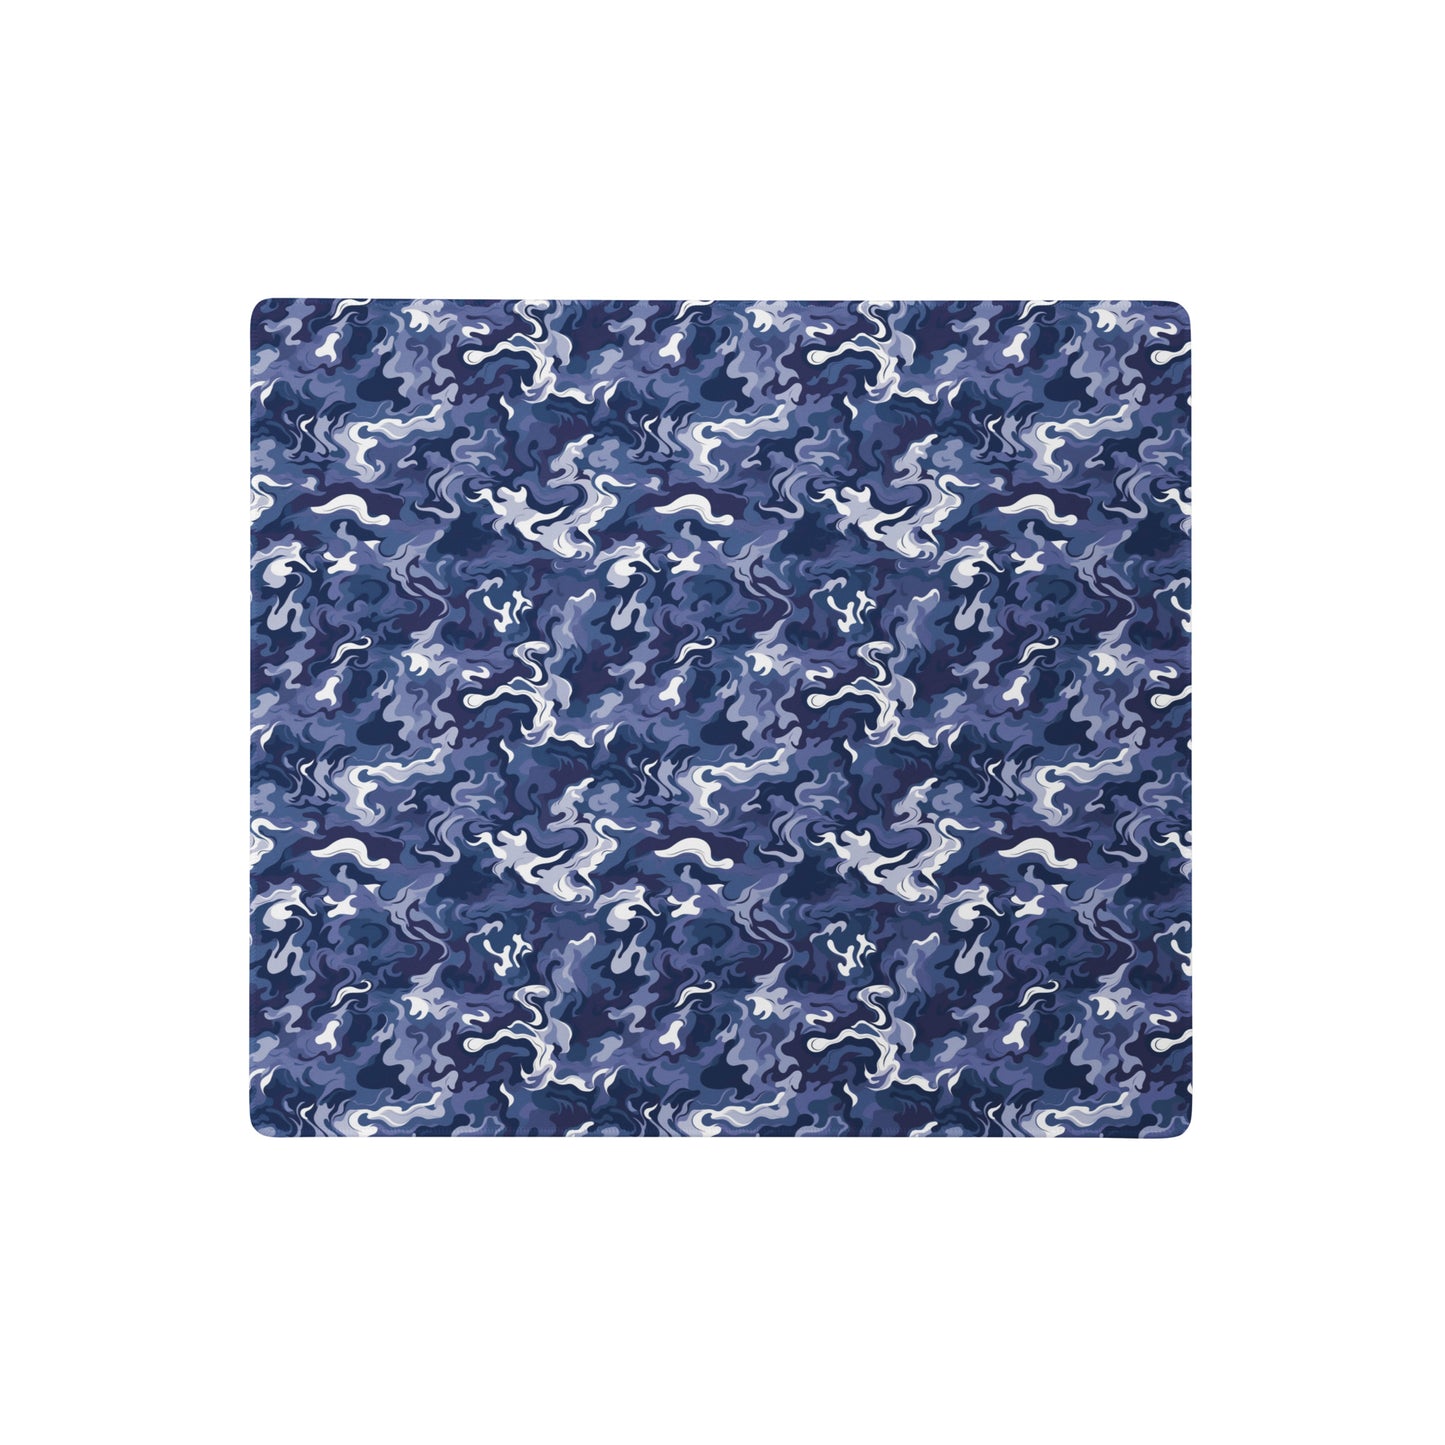 A 18" x 16" desk pad with a royal blue and white camo pattern.